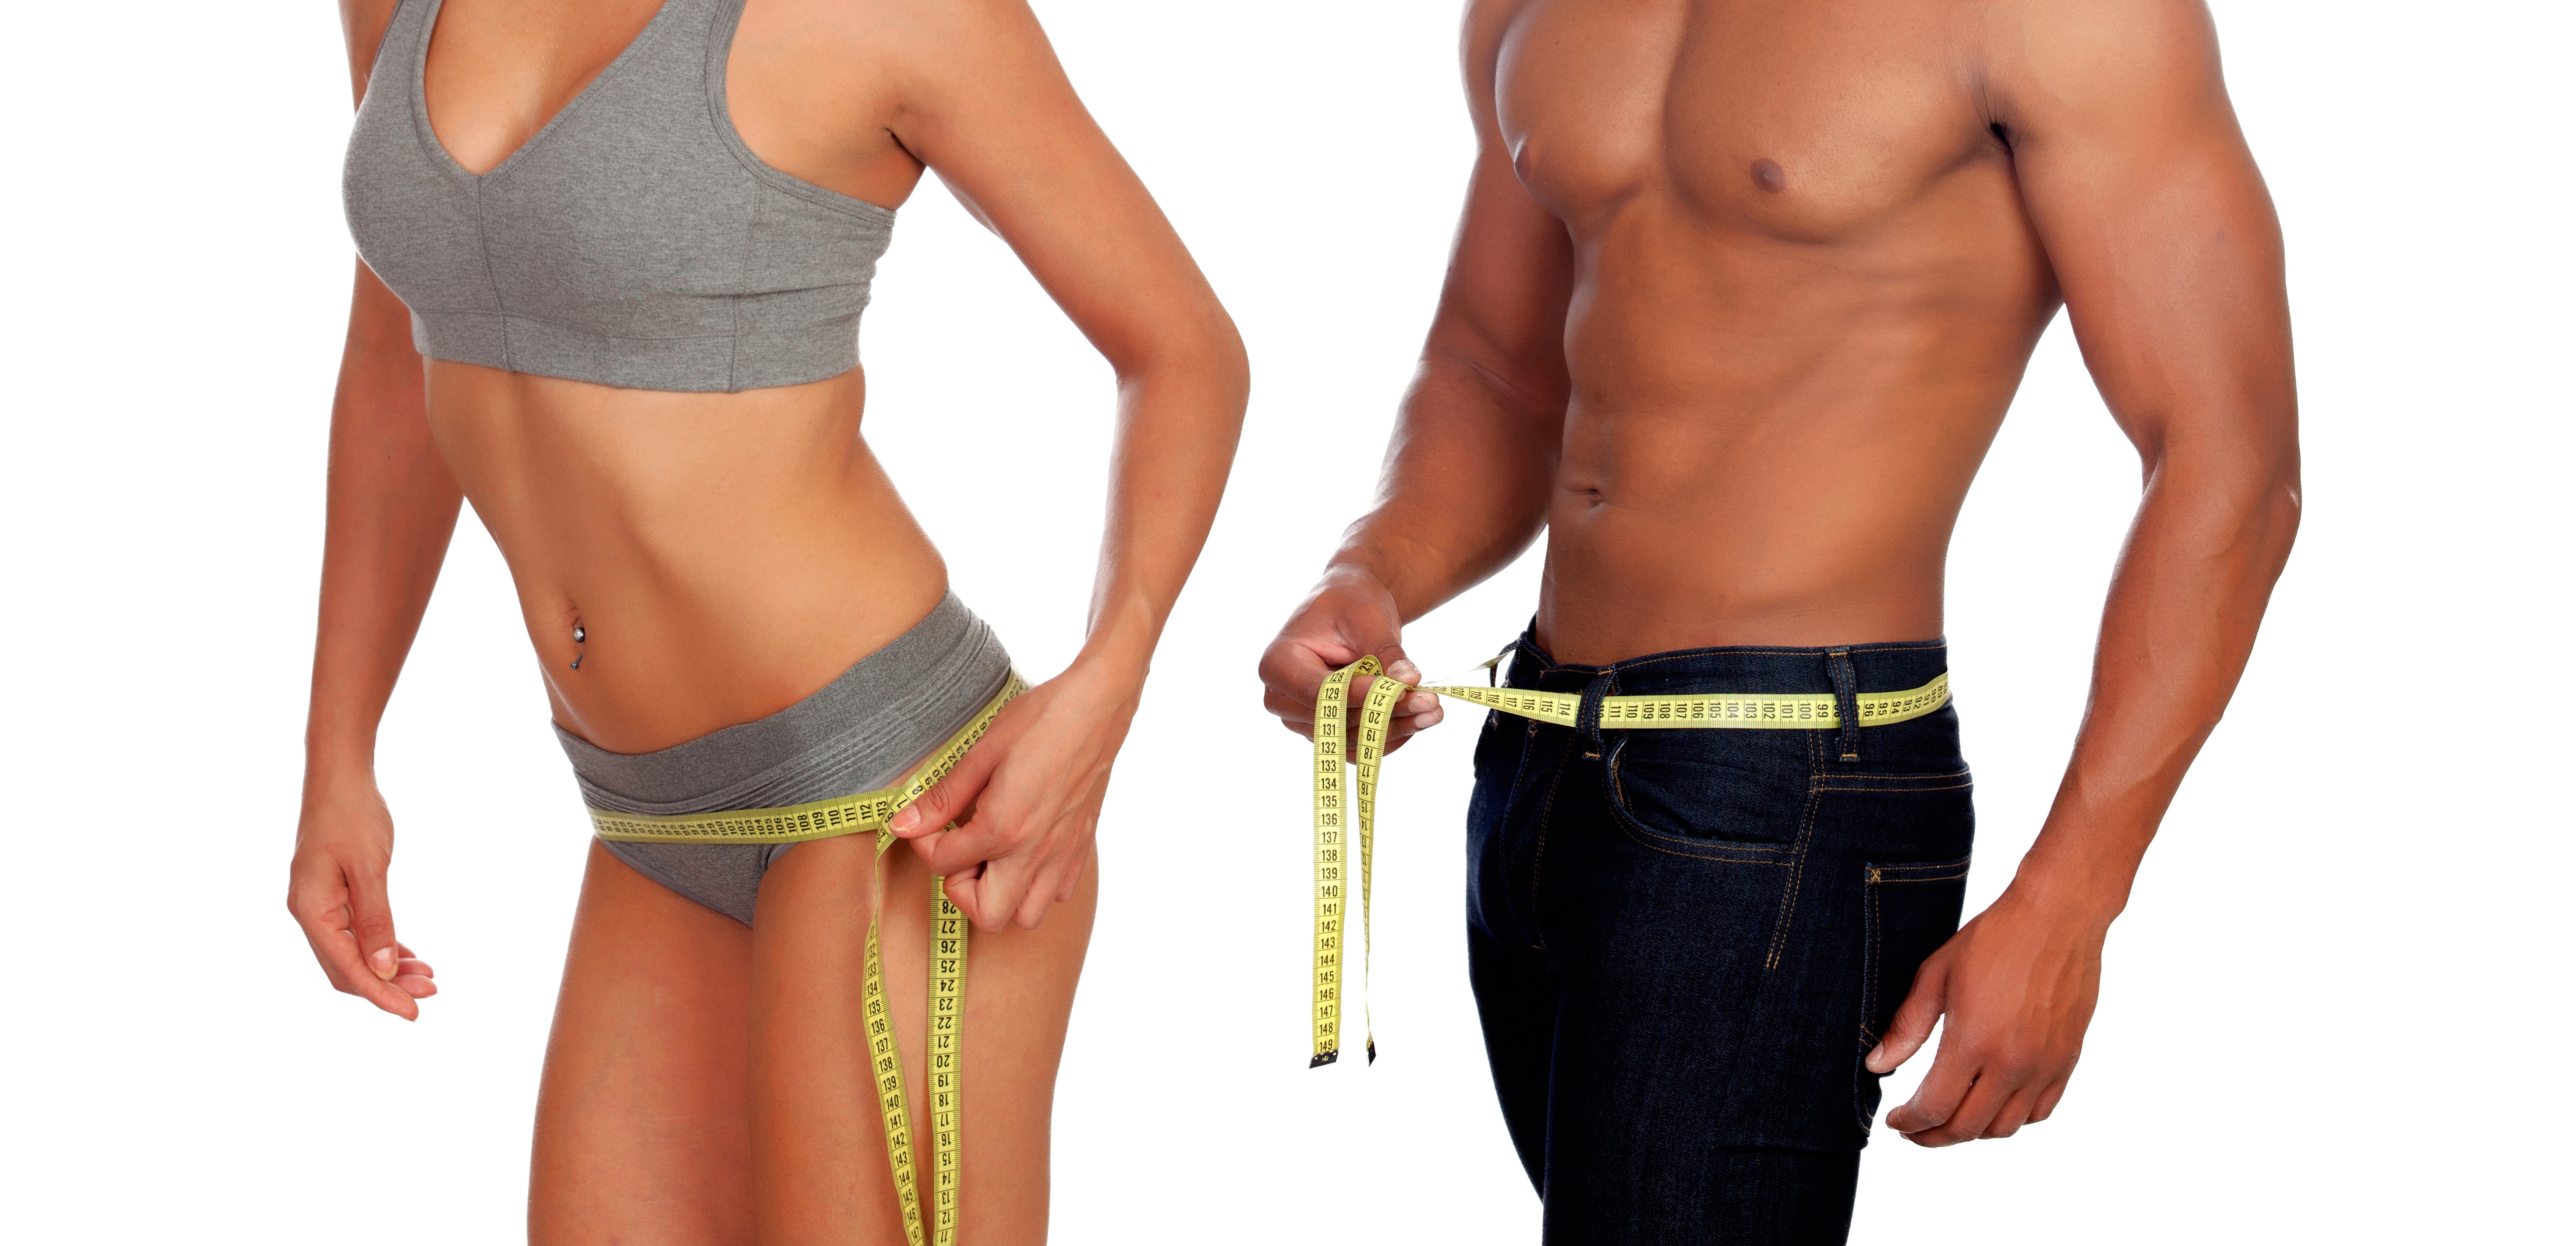 Bodies of man and woman measuring the waist with tape isolated on a white background